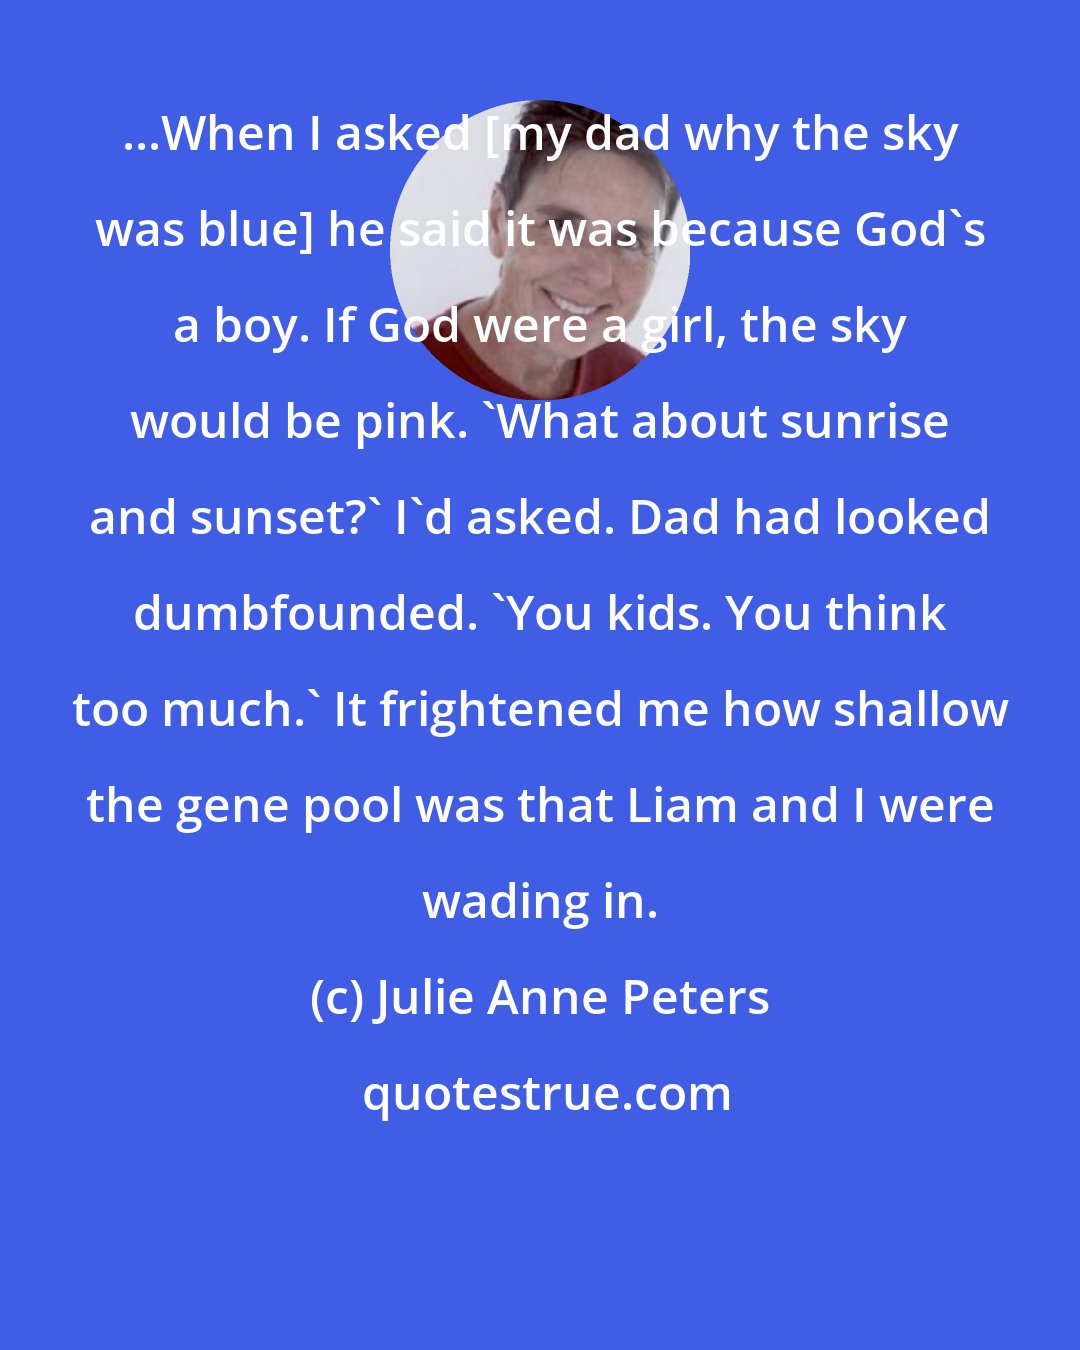 Julie Anne Peters: ...When I asked [my dad why the sky was blue] he said it was because God's a boy. If God were a girl, the sky would be pink. 'What about sunrise and sunset?' I'd asked. Dad had looked dumbfounded. 'You kids. You think too much.' It frightened me how shallow the gene pool was that Liam and I were wading in.